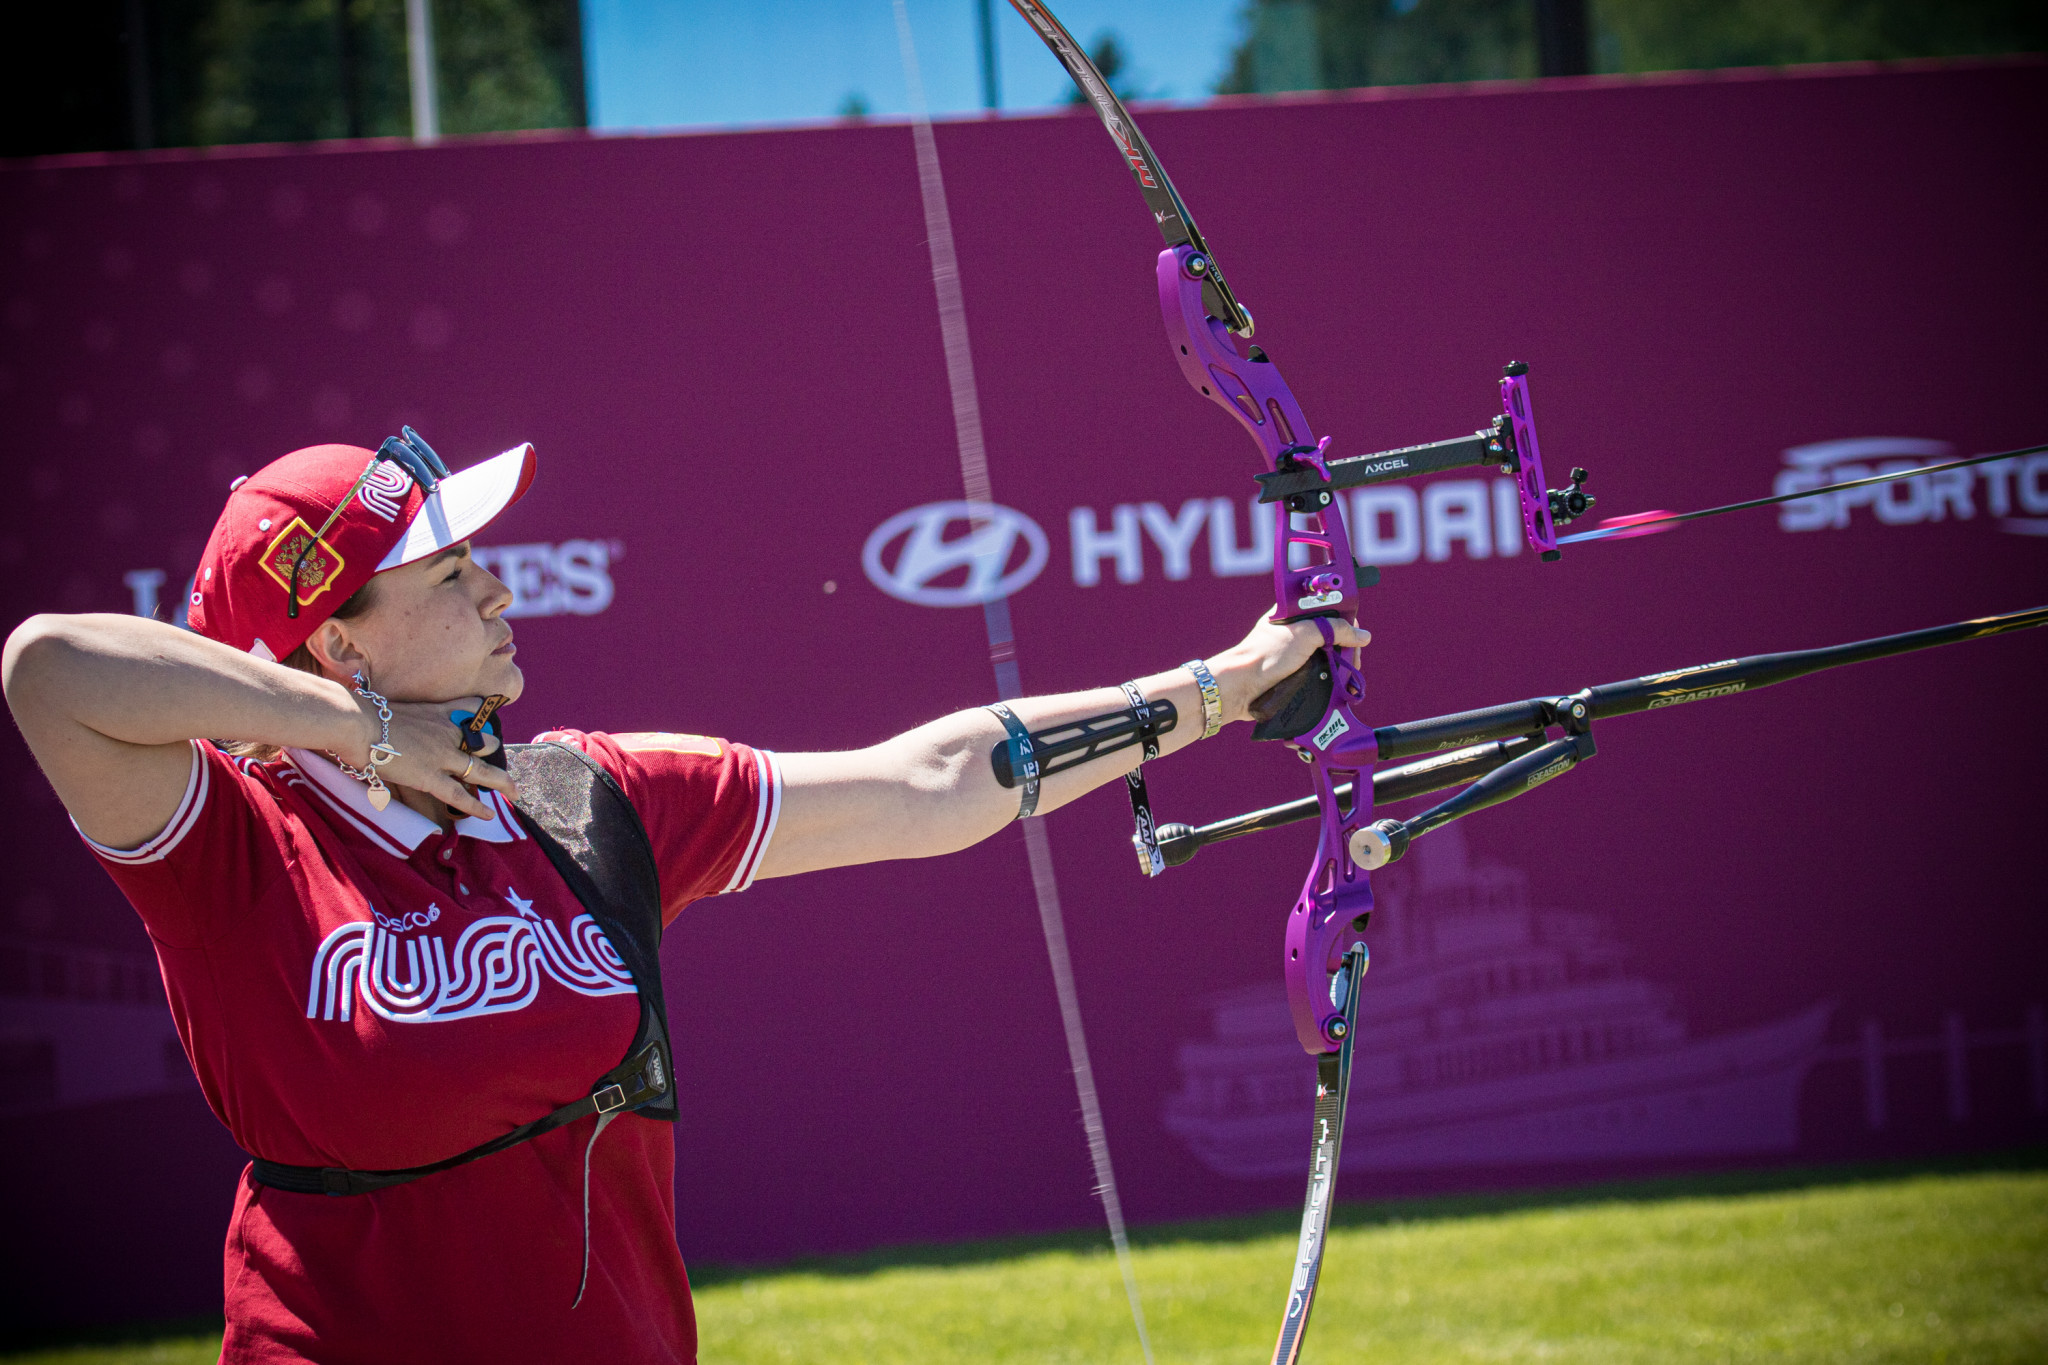 World Archery has joined the list of International Federations to have banned Russia and Belarus from their events ©Getty Images